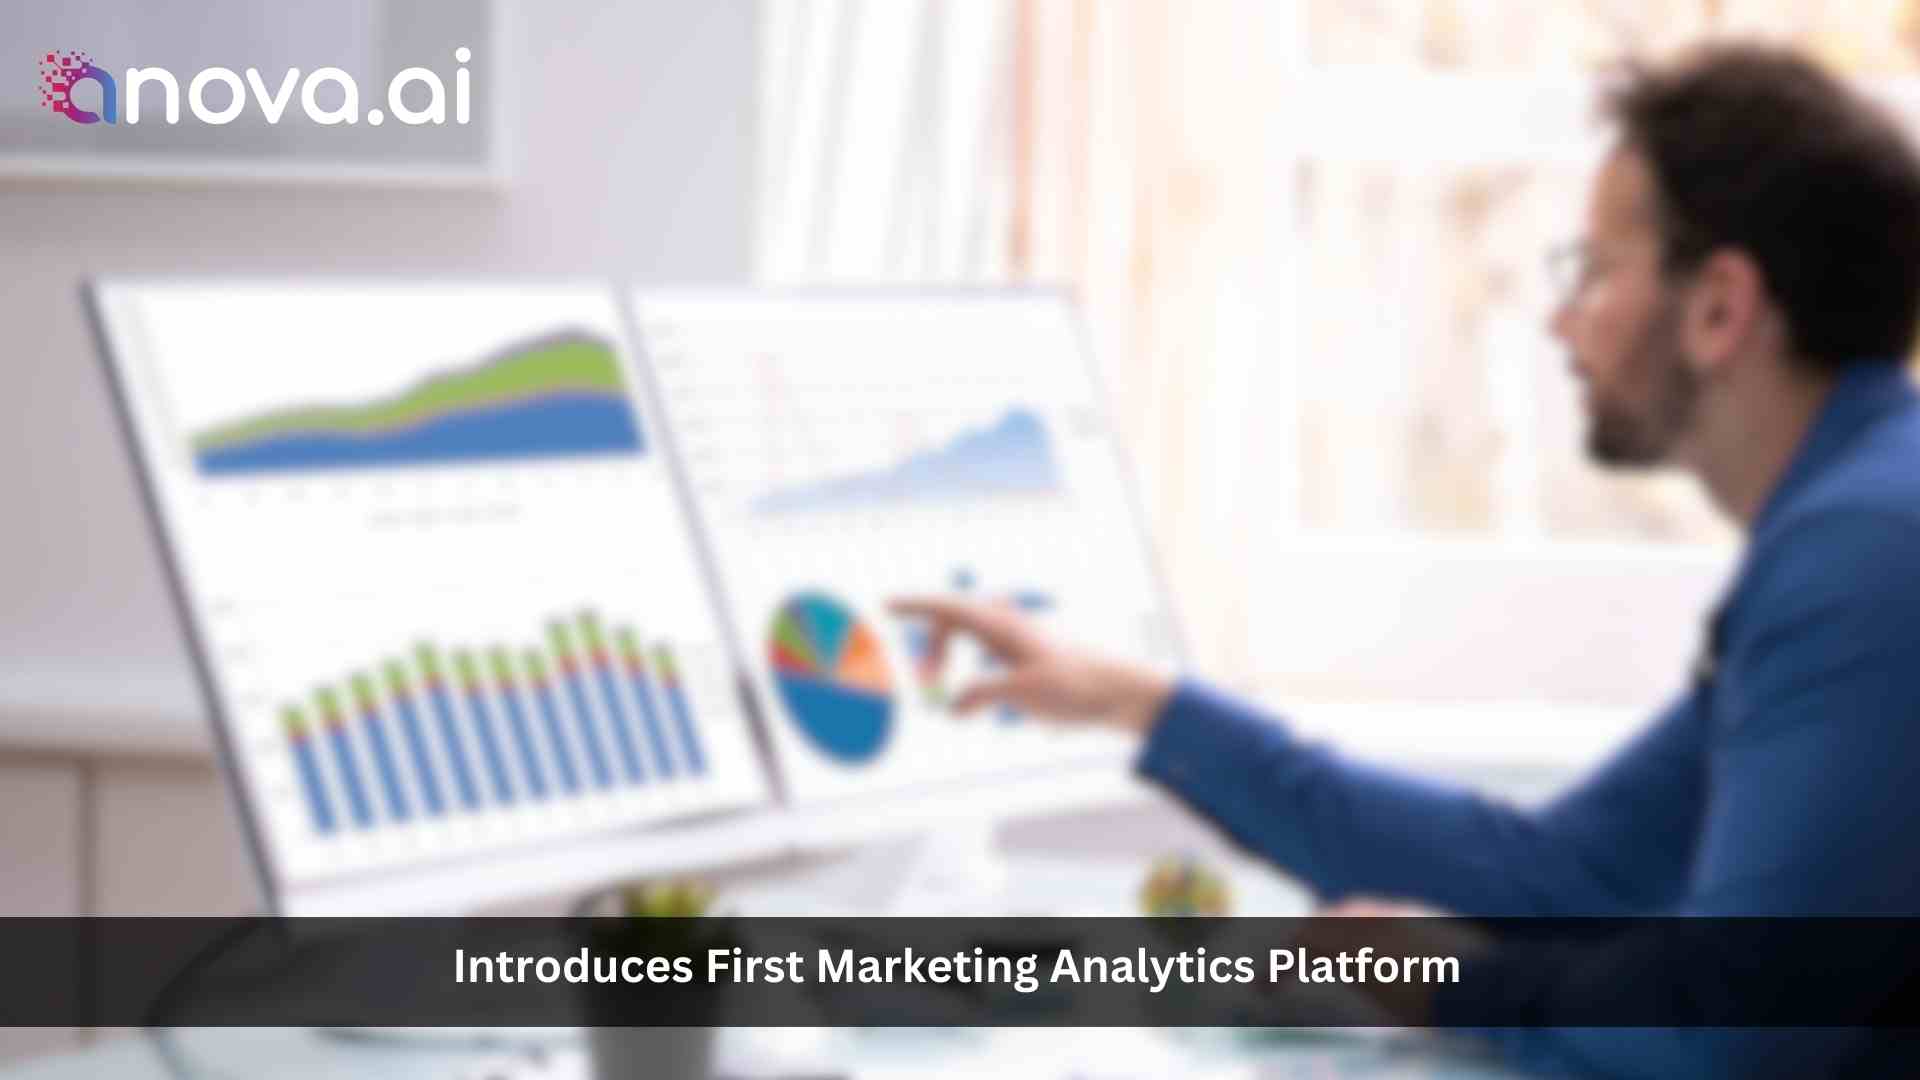 Anova.ai Introduces the First Marketing Analytics Platform Powered by Generative AI and Purpose-Built for SMBs